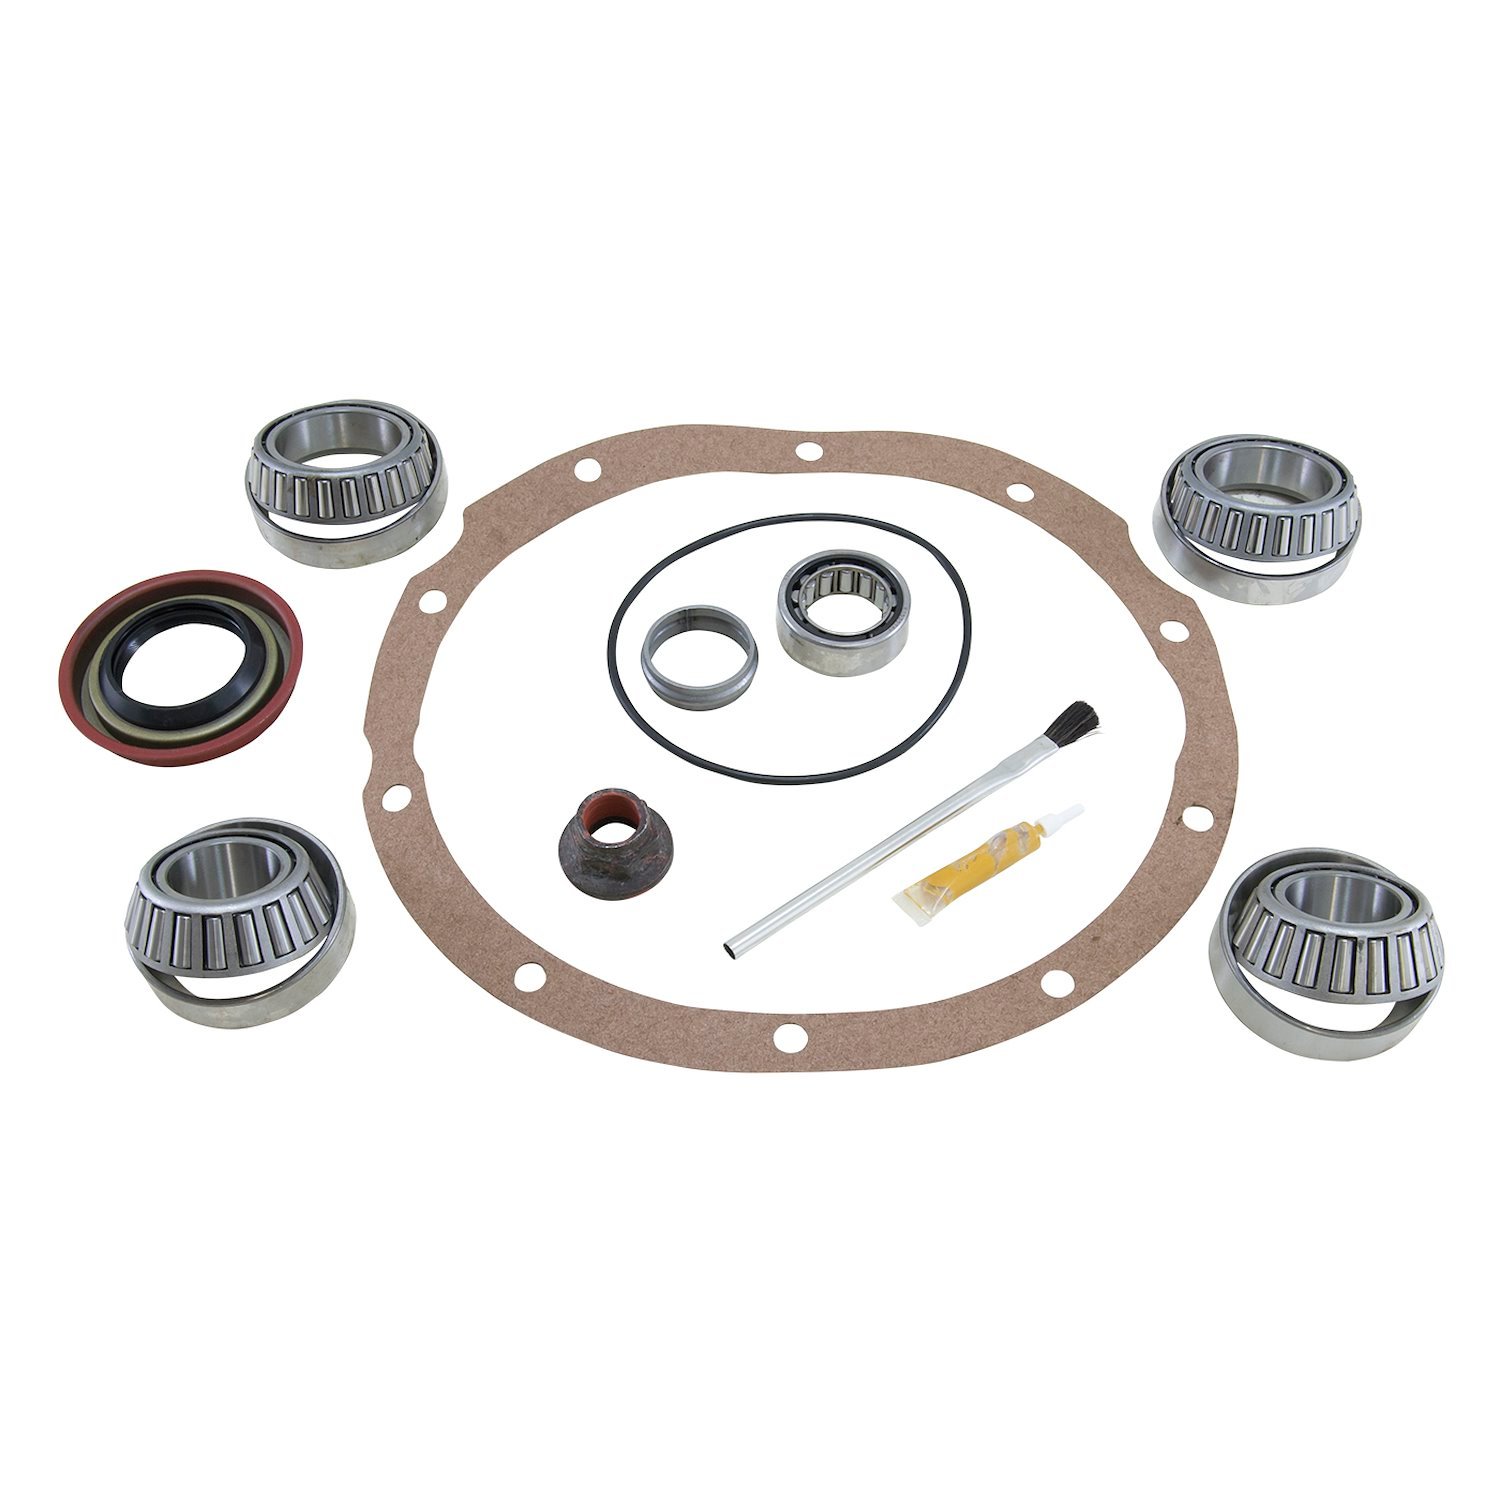 Bearing Install Kit For Ford 9 in. Differential, Lm104911 Bearings